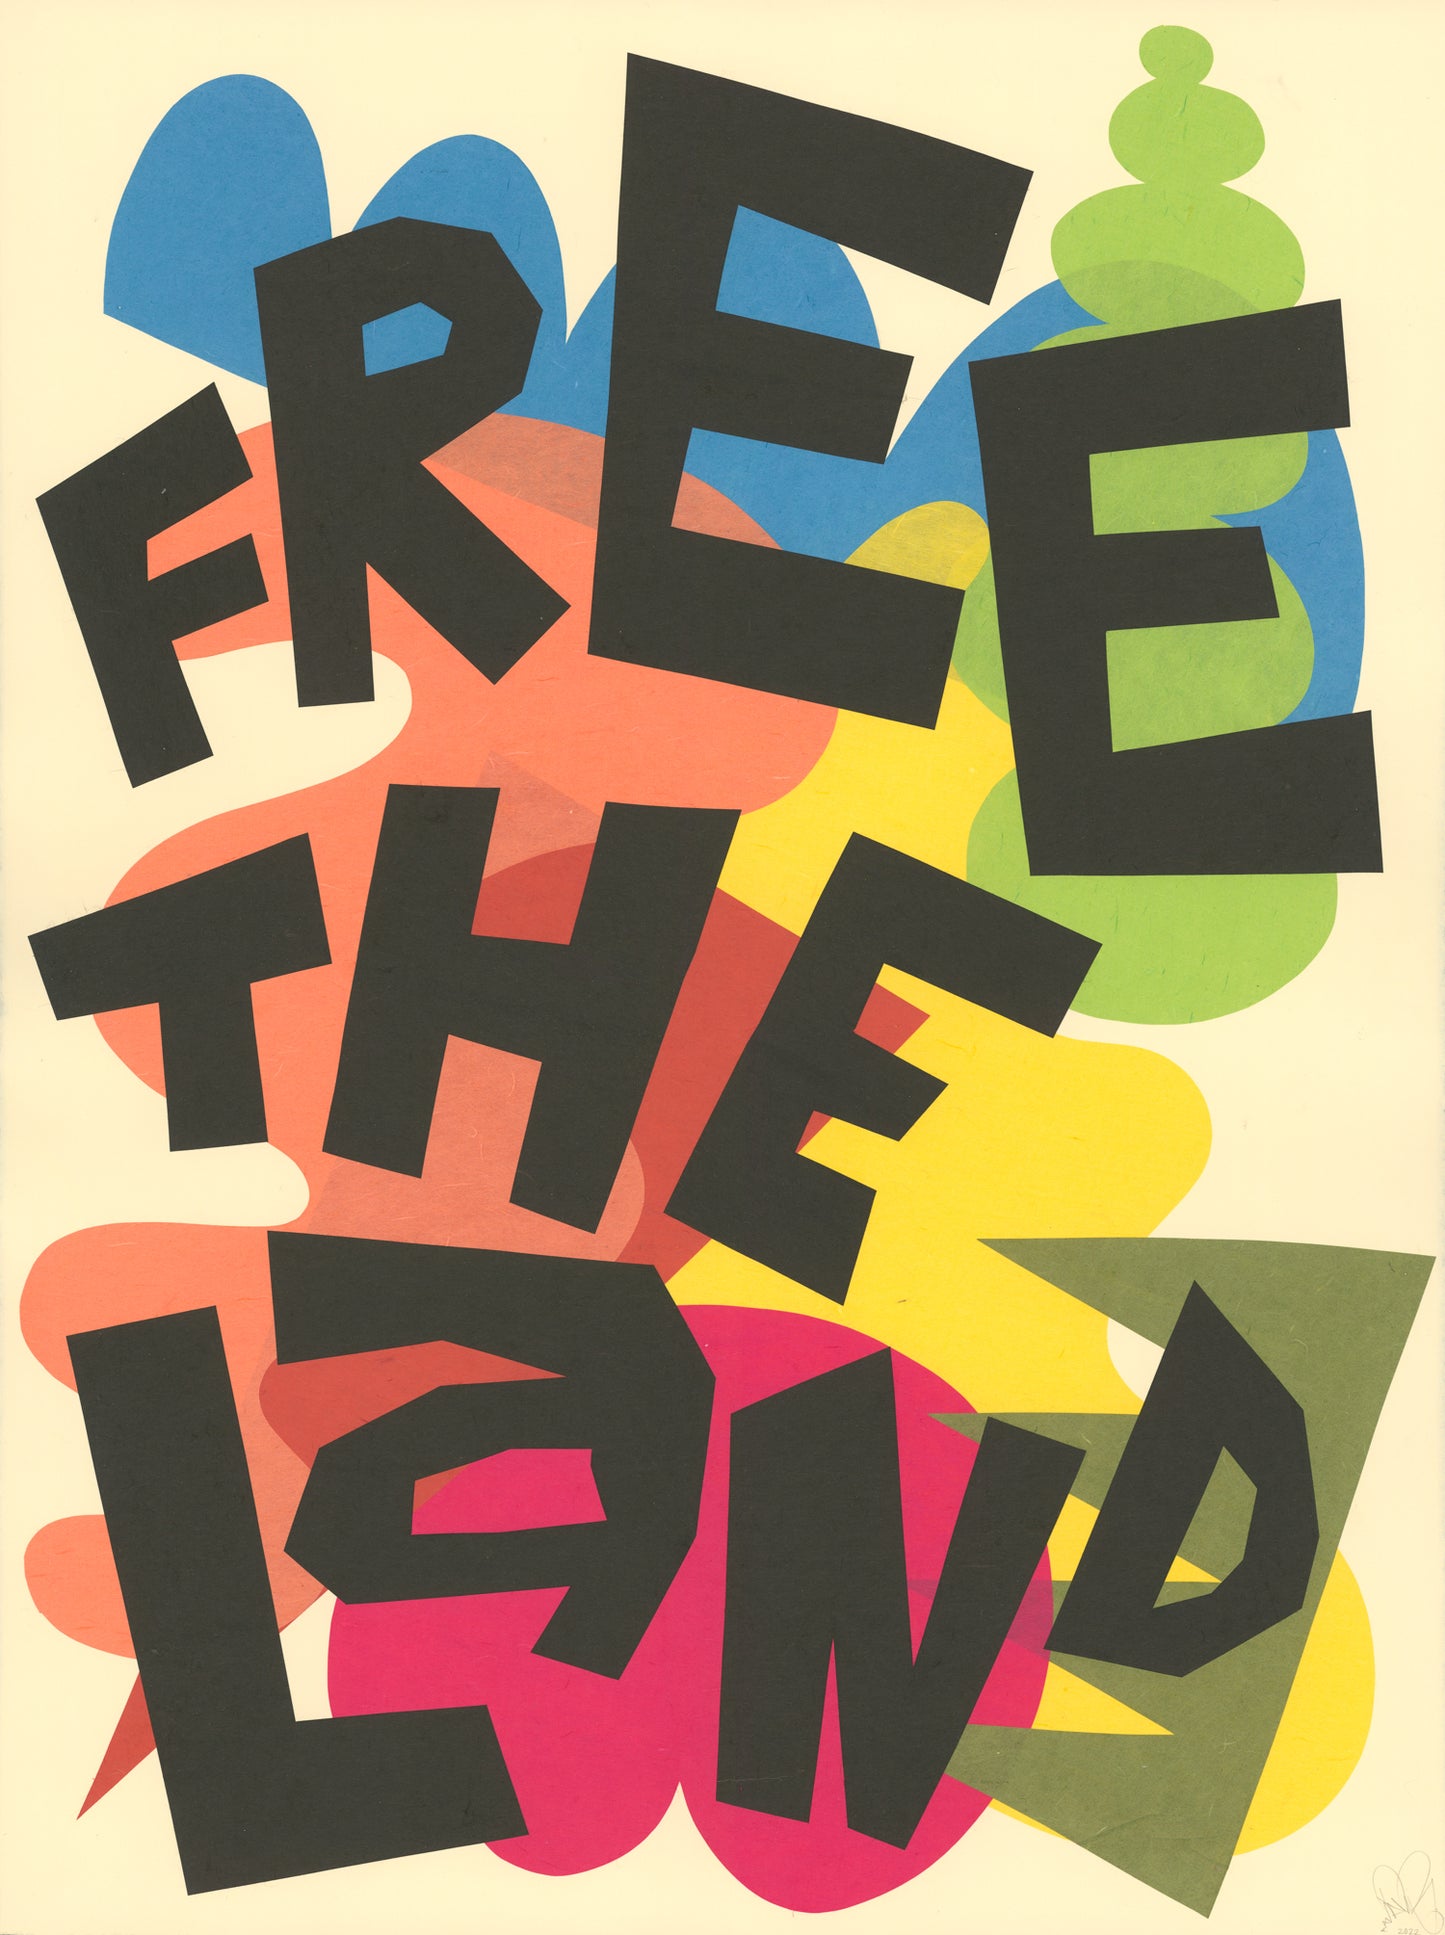 Free The Land (Black Text)